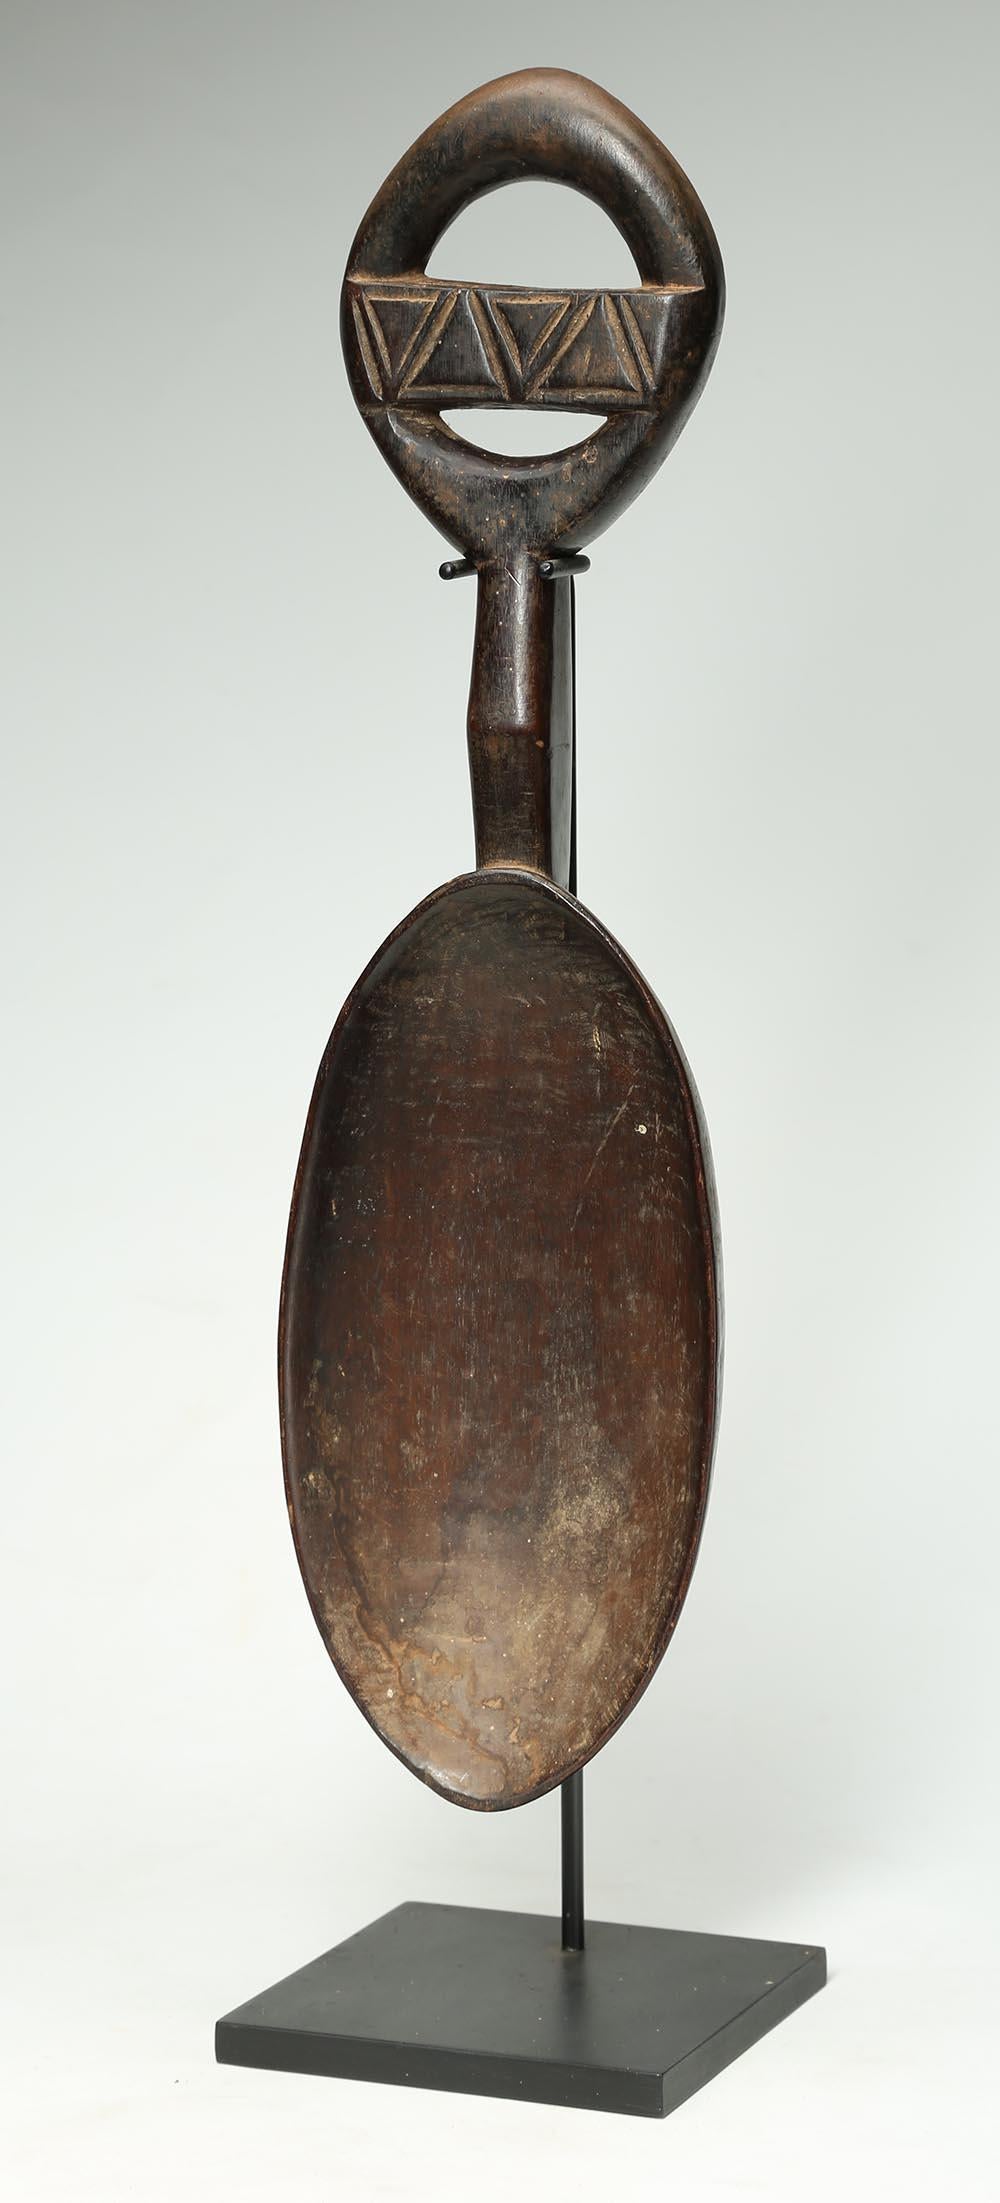 Hand-Carved Dan Tribal Ritual Serving Spoon with Circular Handle, Ivory Coast, Africa